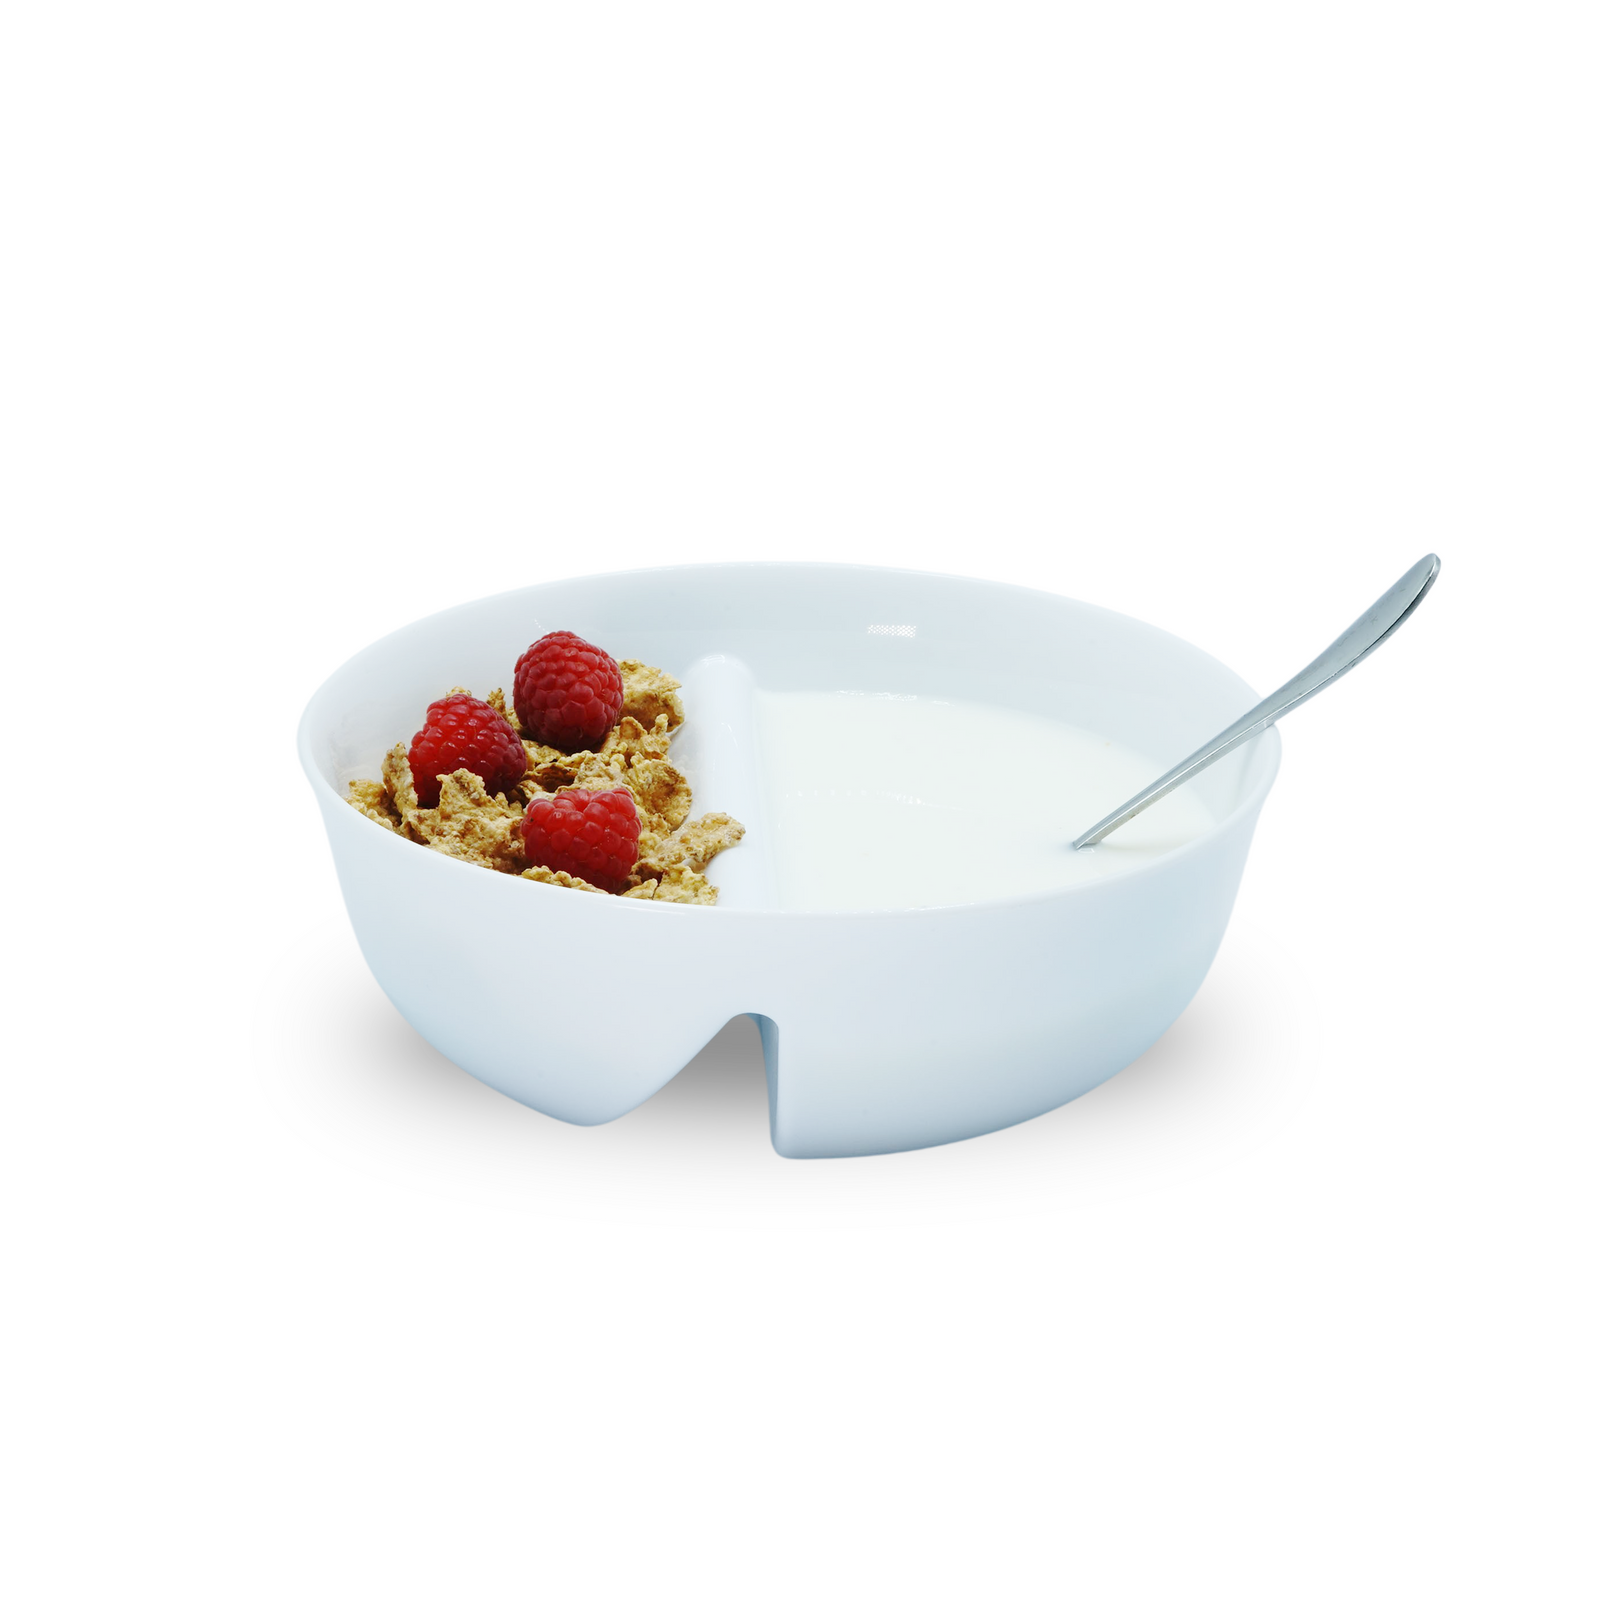  CRUNCHCUP XL BLUE - Portable Plastic Cereal Cups for Breakfast  On the Go, To Go Cereal and Milk Container for your favorite Breakfast  Cereals, No Spoon or Bowl Required: Home 